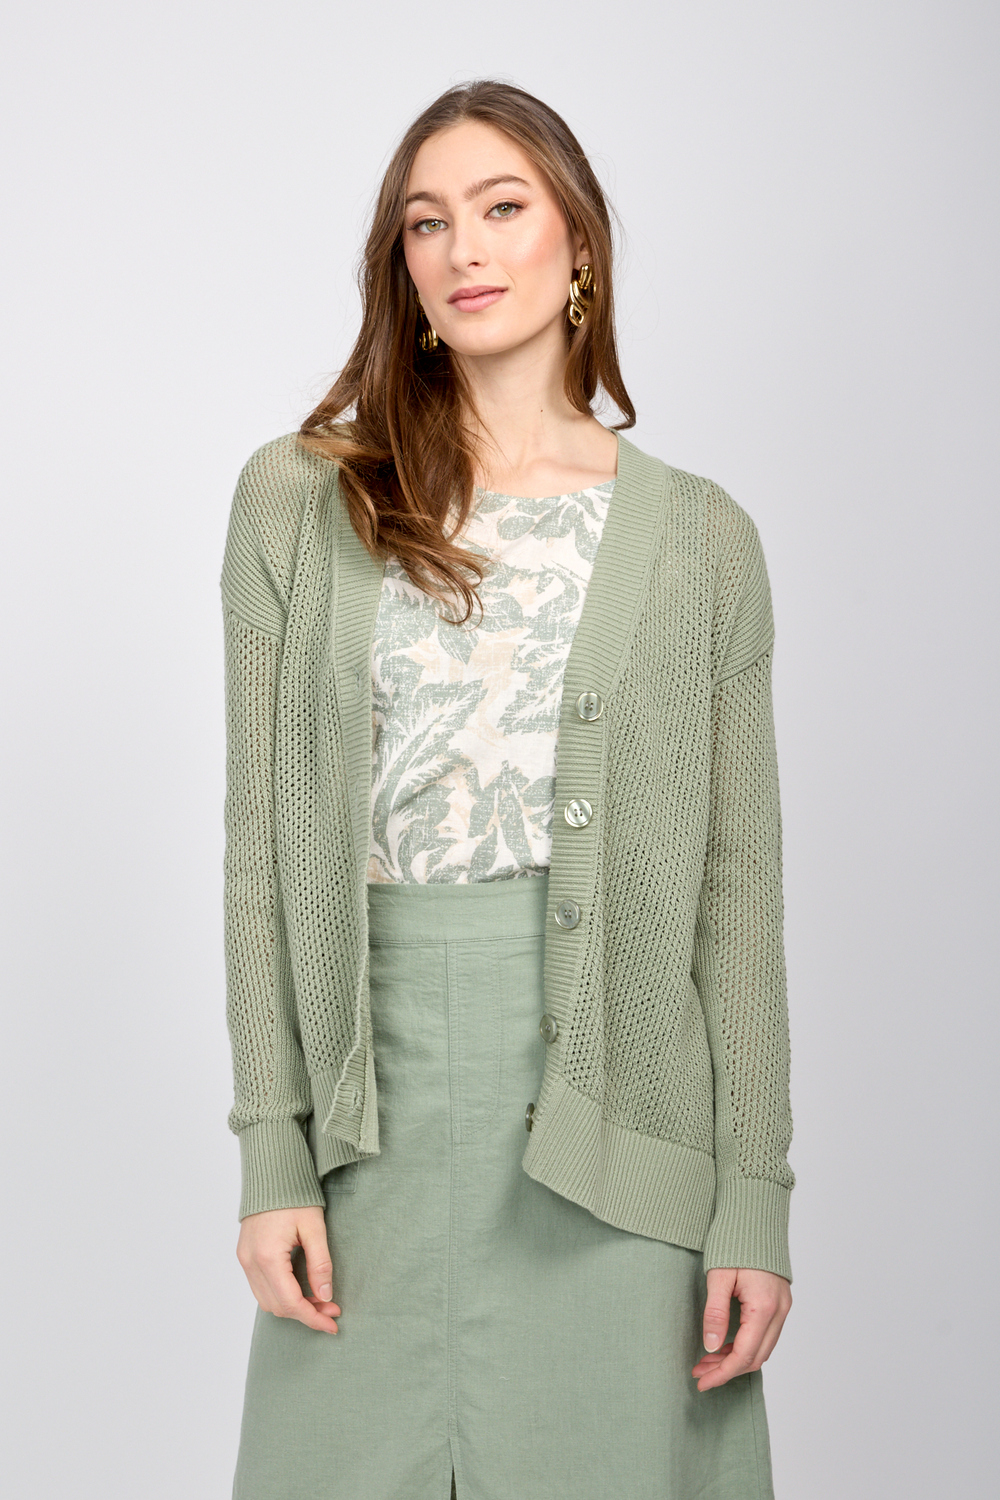 front-button closure cardigan style SP2453. Sage